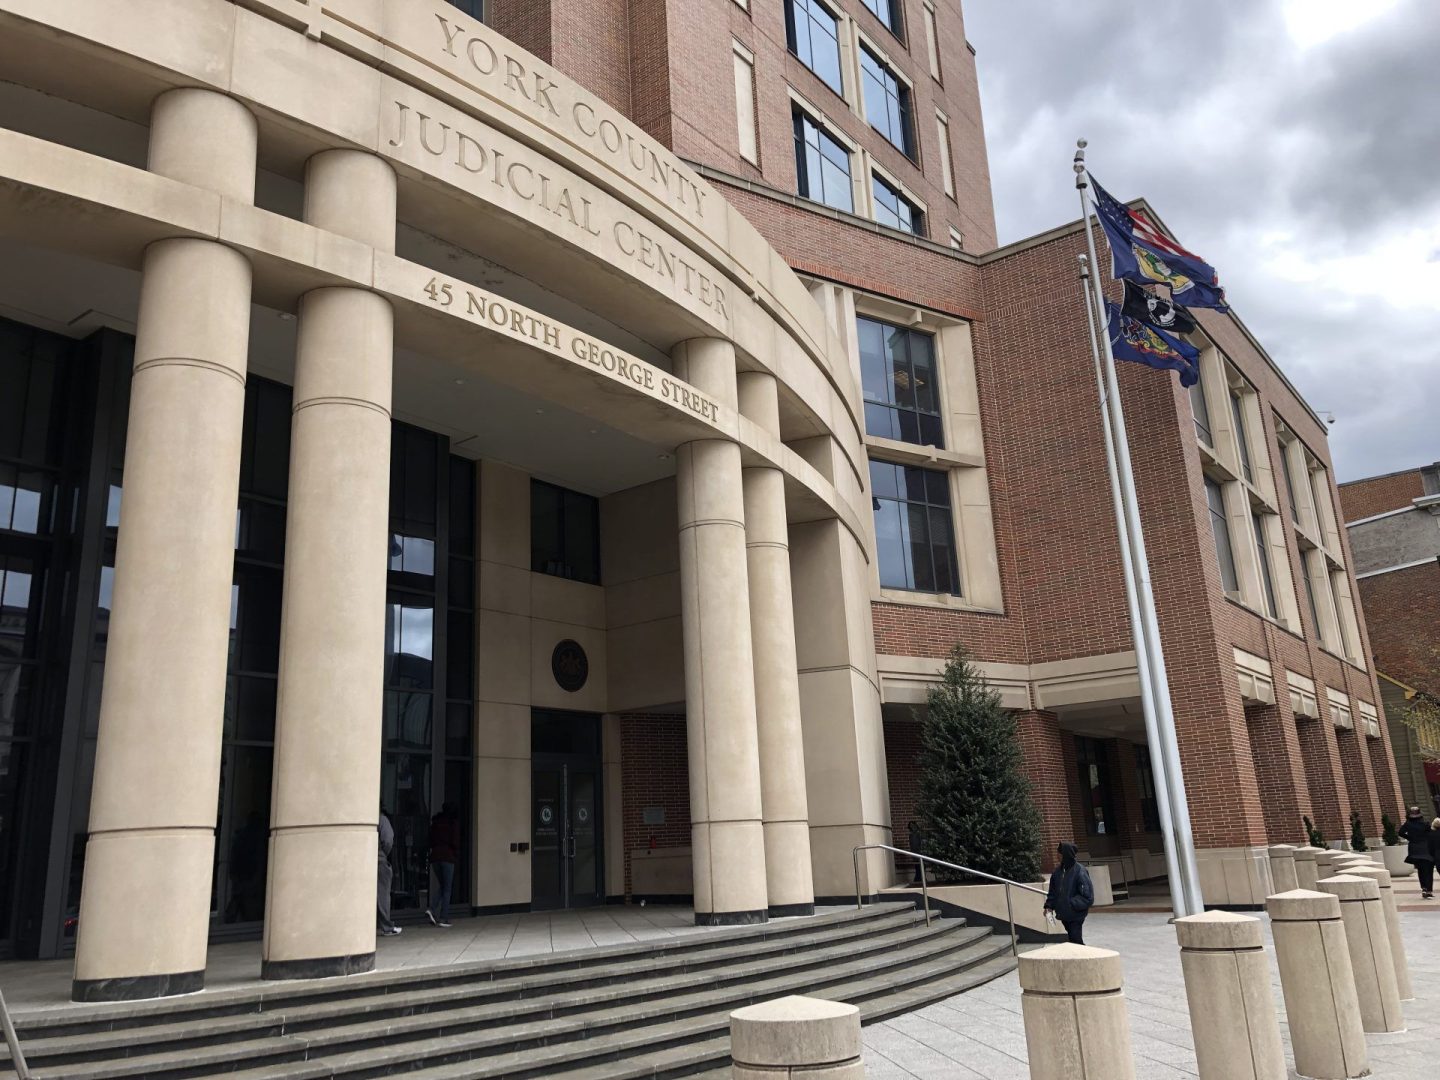 The access problems date back to late 2019, when a computer that allowed the public to access criminal records for free was removed from the first floor of the York County courthouse.